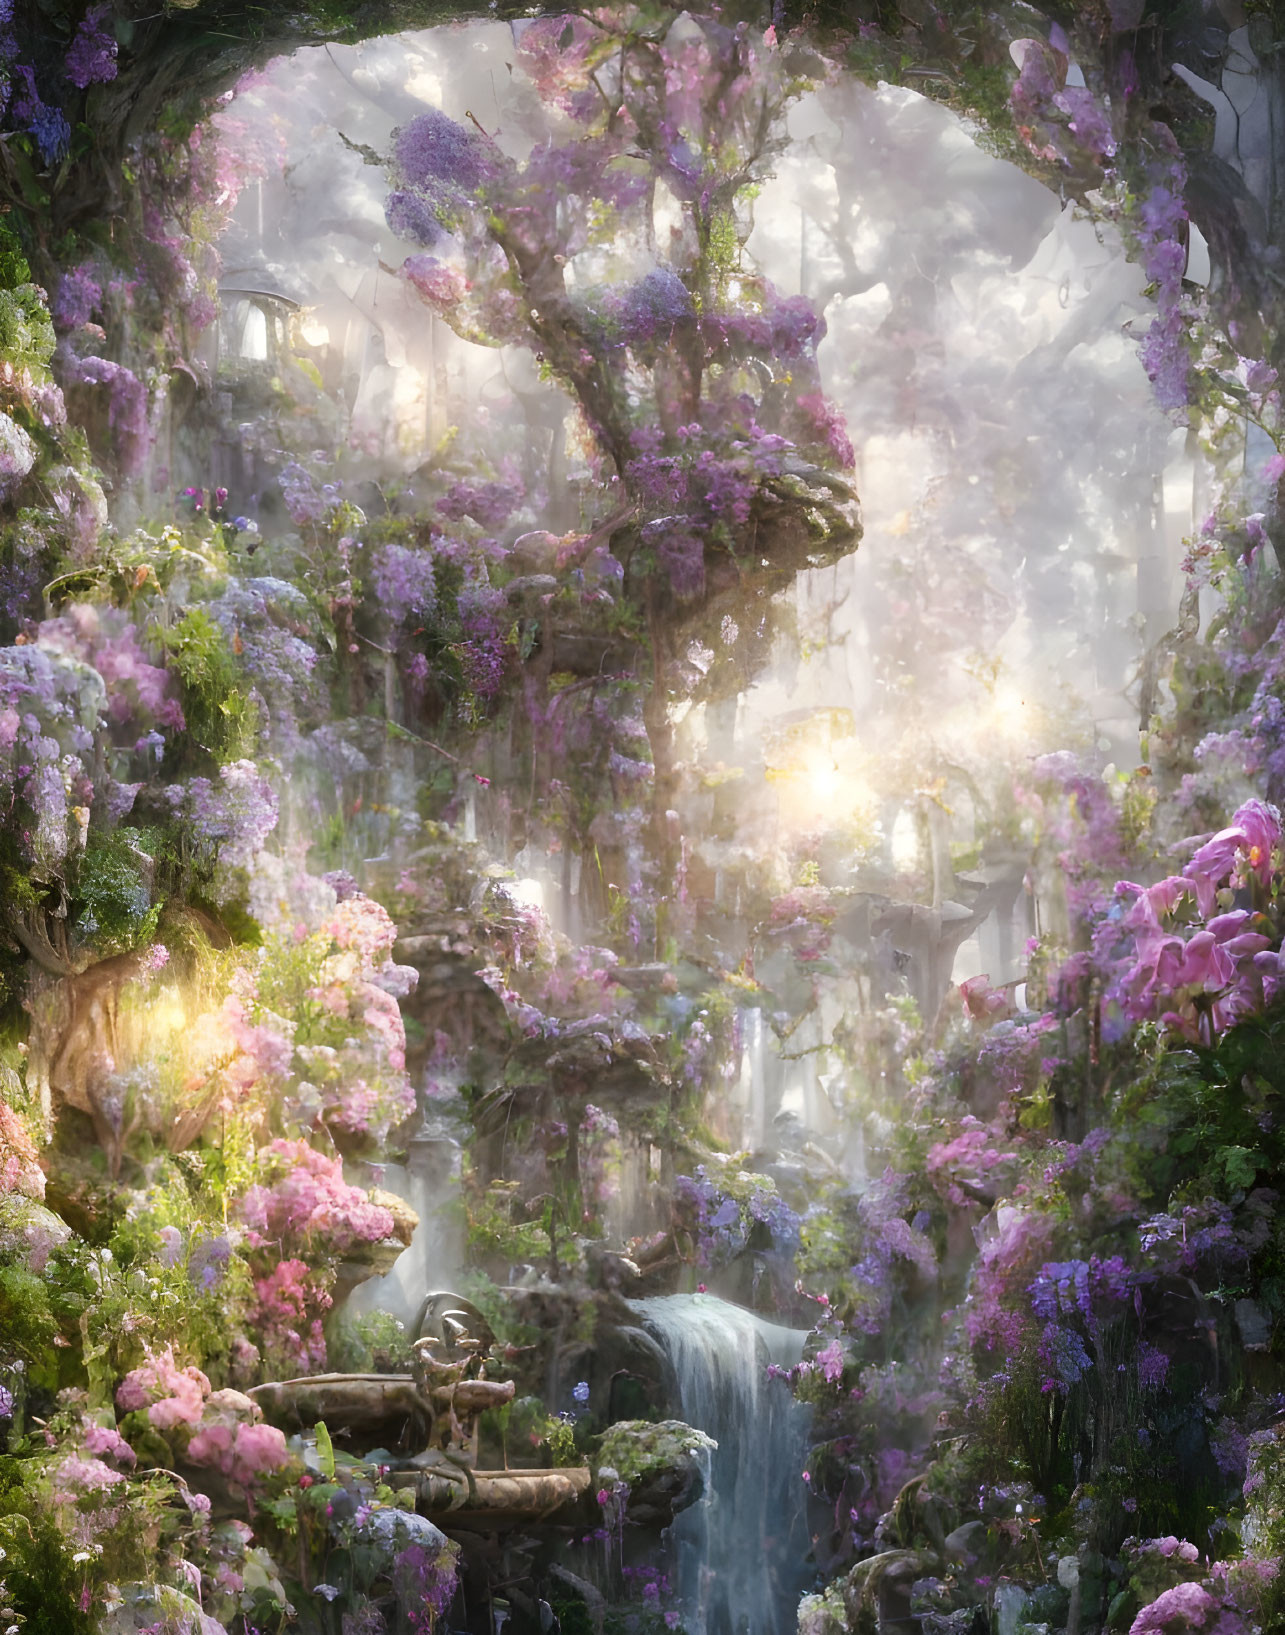 Forest scene with purple flowers, hanging vines, and a misty waterfall in soft sunlight